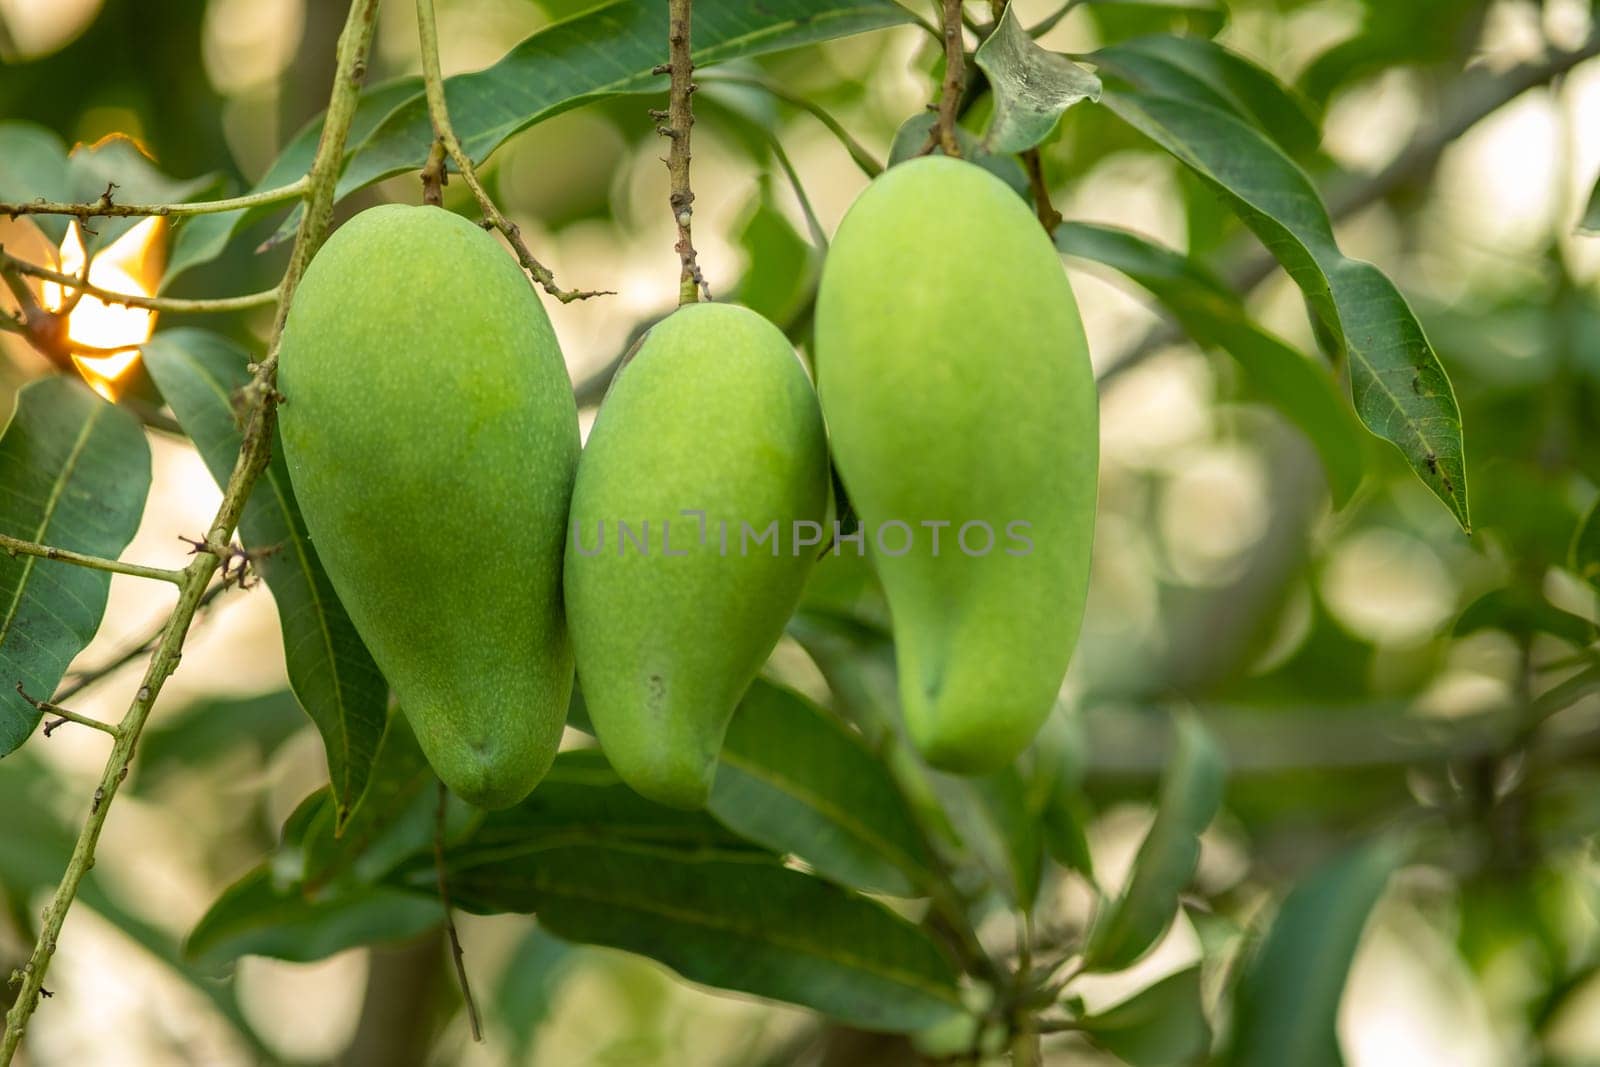 close up raw green mango hanging on the tree, Green mango fruit is growing on a tree, A branch with green mangoes by wuttichaicci